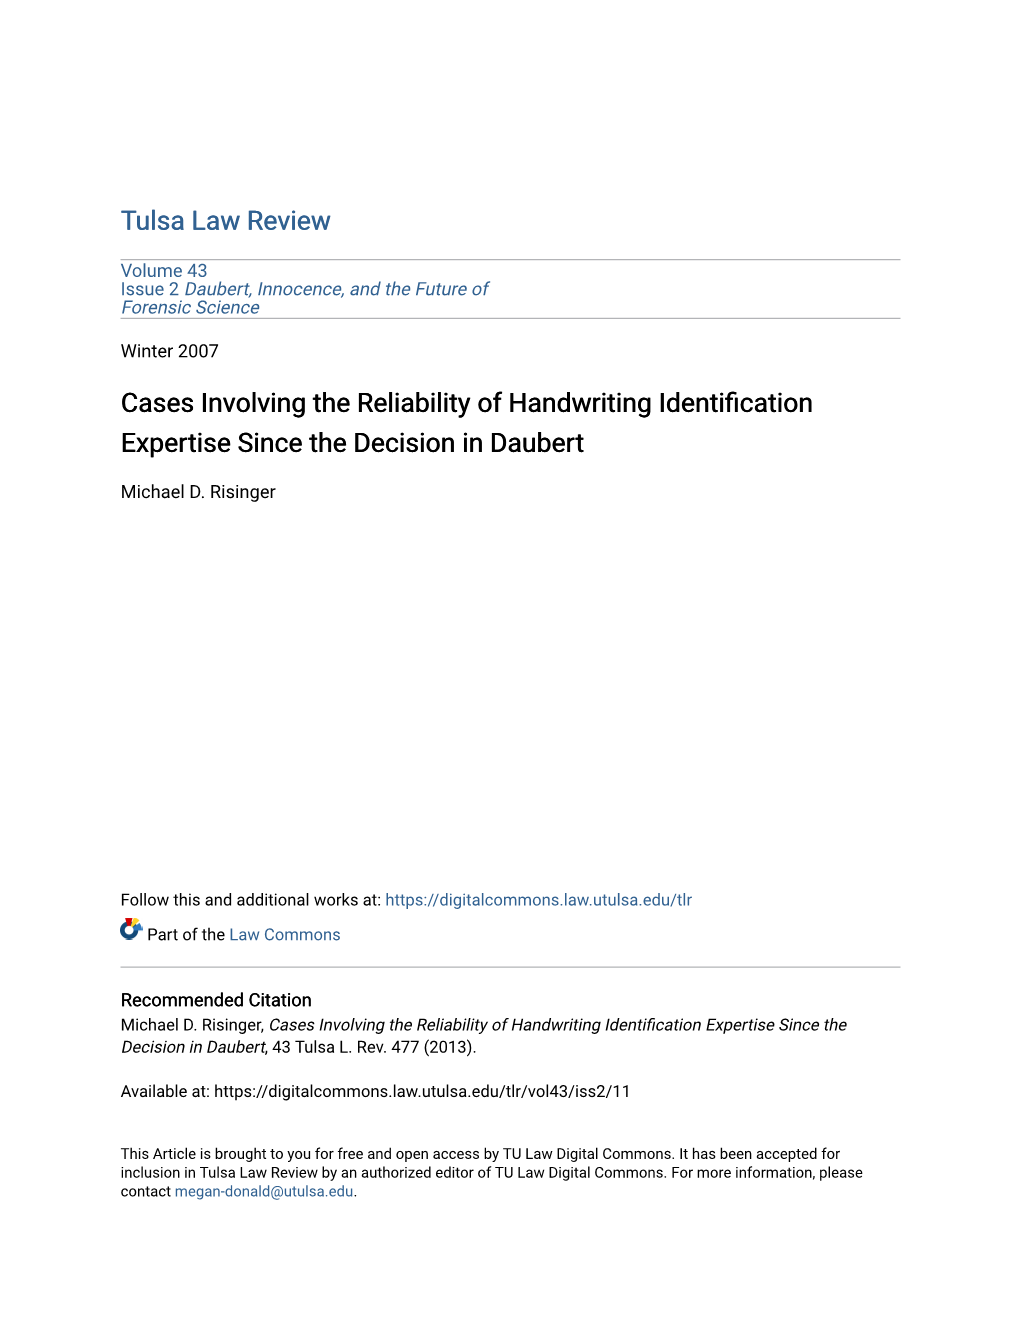 Cases Involving the Reliability of Handwriting Identification Expertise Since the Decision in Daubert